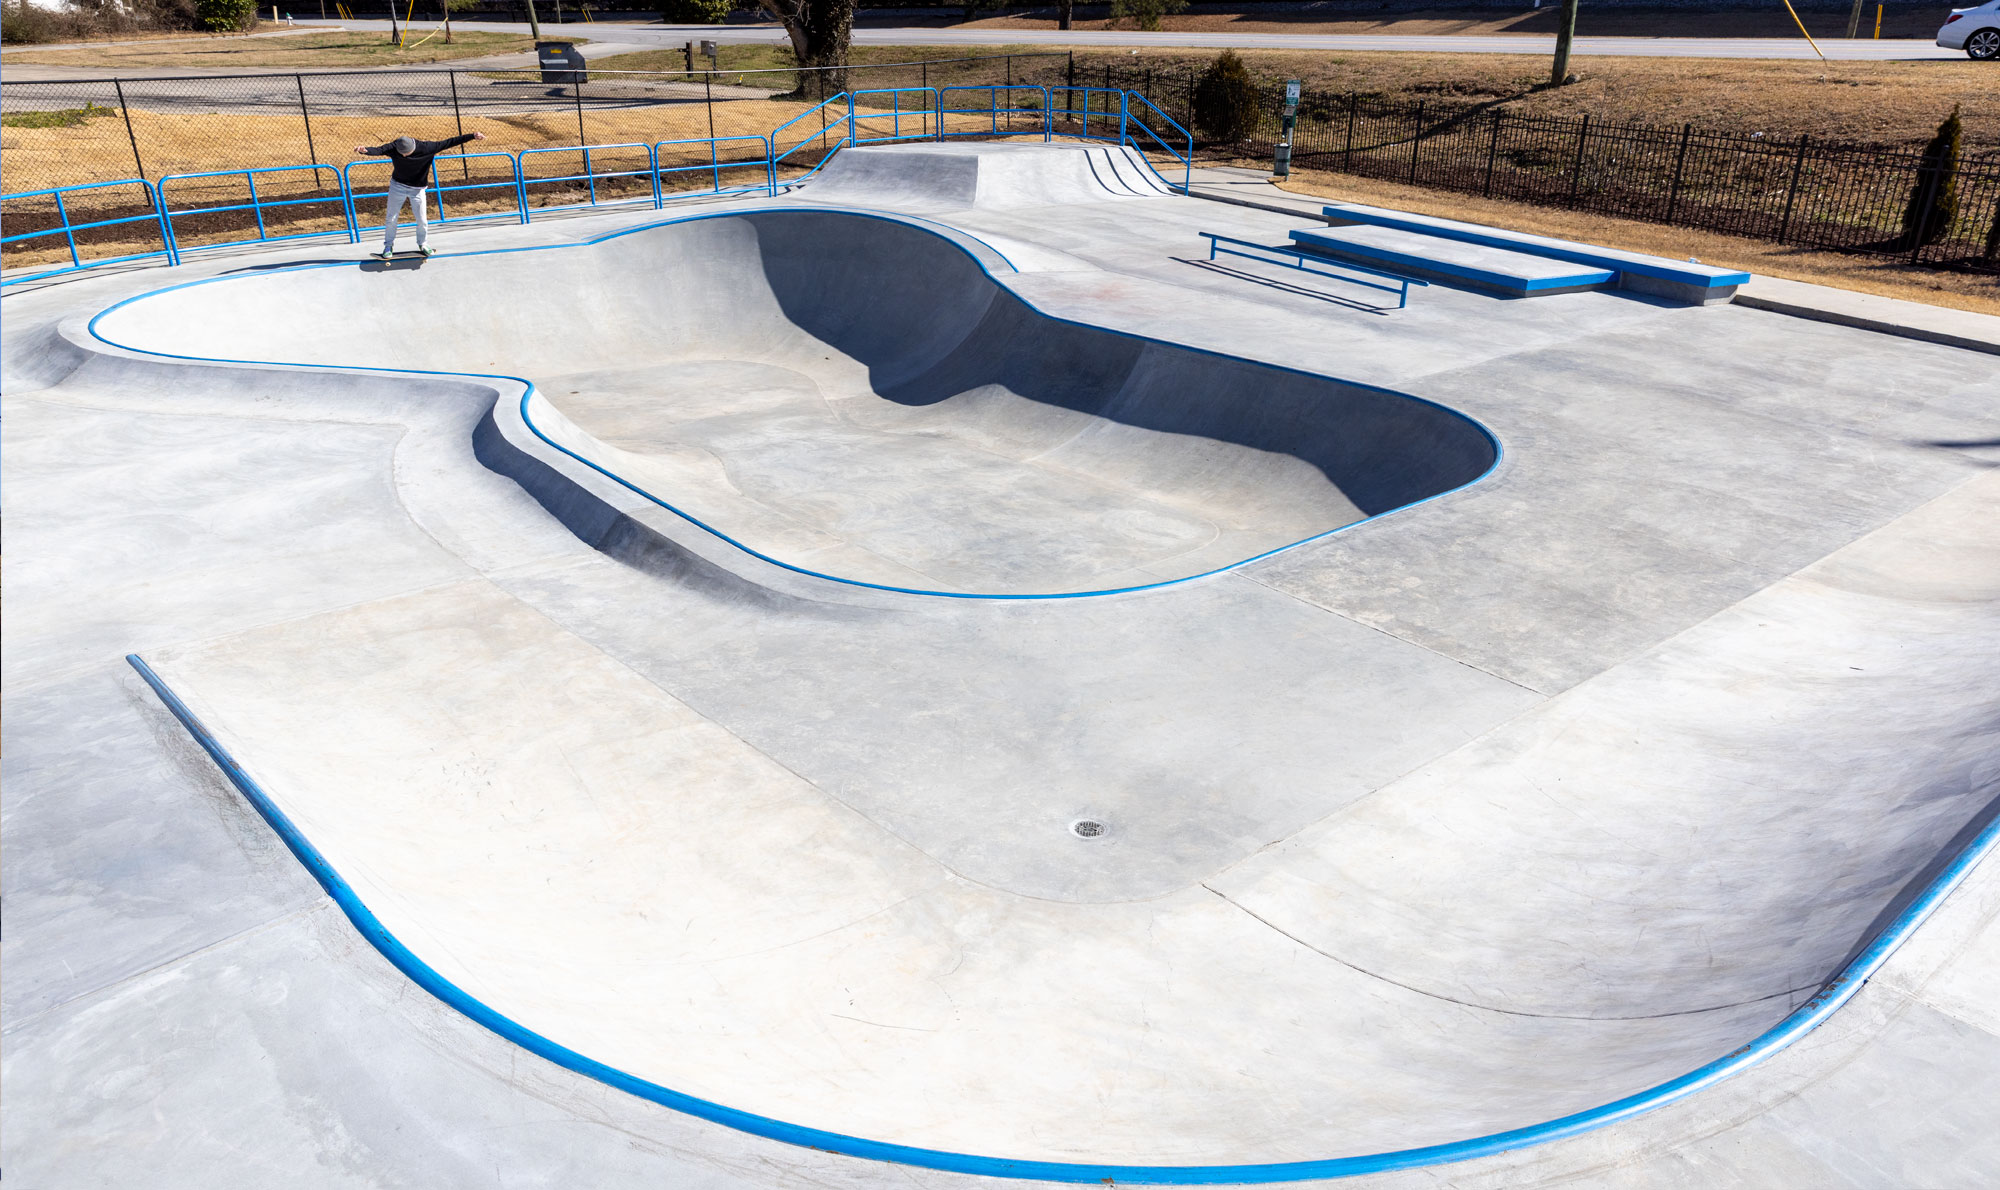 Warming up with a backside 5050 at in the bowl at Union City Skatepark, GA